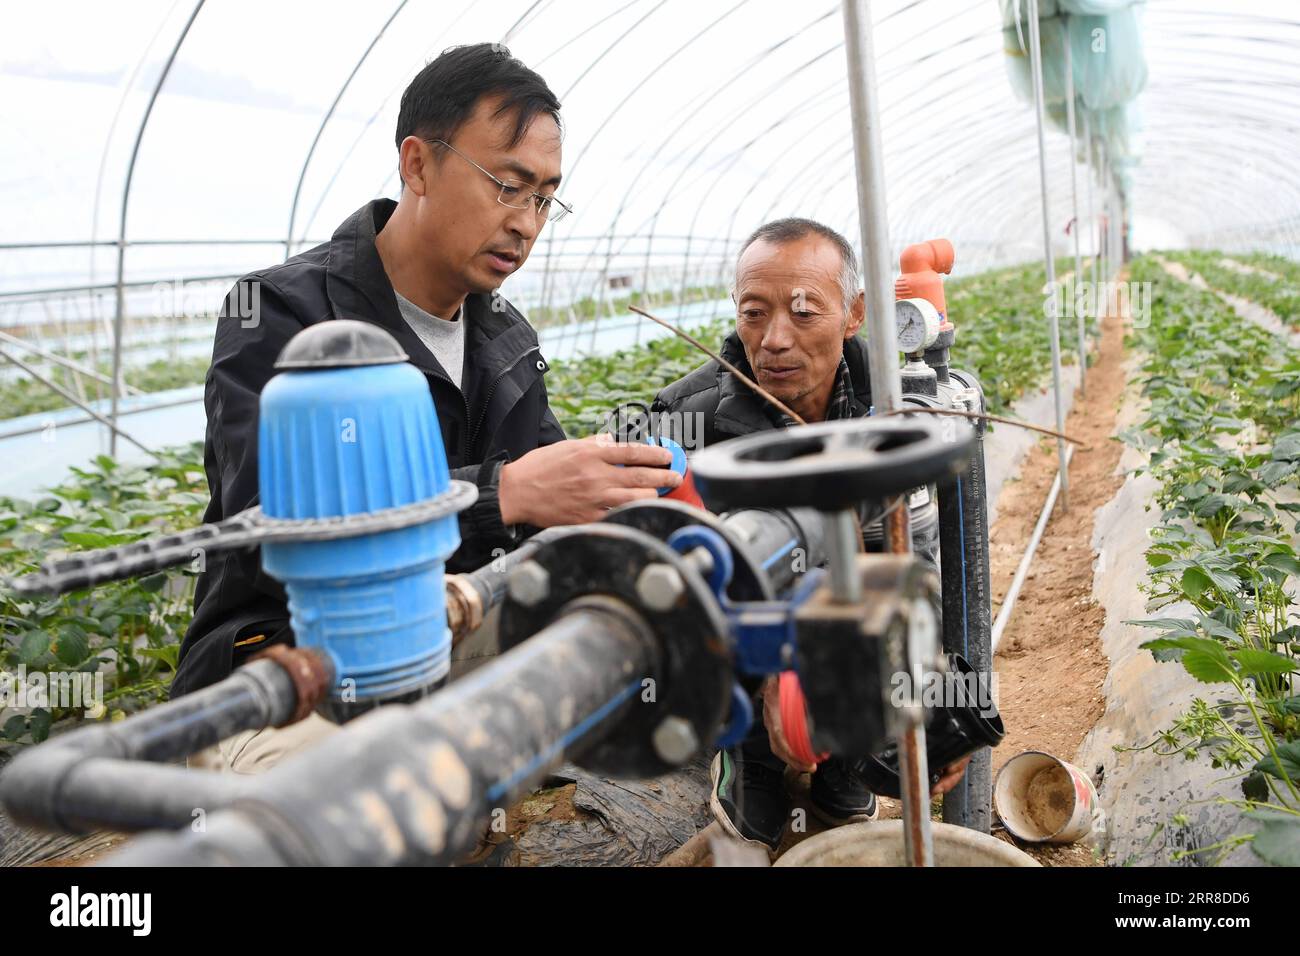 210503 -- TIANSHUI, May 3, 2021 -- Zhang Shuhao L learns about the operational condition of a strawberry greenhouse from a villager in Mudan Township, Tianshui City of northwest China s Gansu Province, on April 27, 2021. Zhang Shuhao, 42, quit his well-paid job three years ago to start an agriculture company with a few partners sharing the same vision at a mountainous village in Mudan Township, Tianshui City. In three years, Xinghuarong, Zhang s company, contracted 6,200 mu about 413 hectares of idle arable lands, where terraced fields, greenhouses, and a reservoir have been built to grow dive Stock Photo